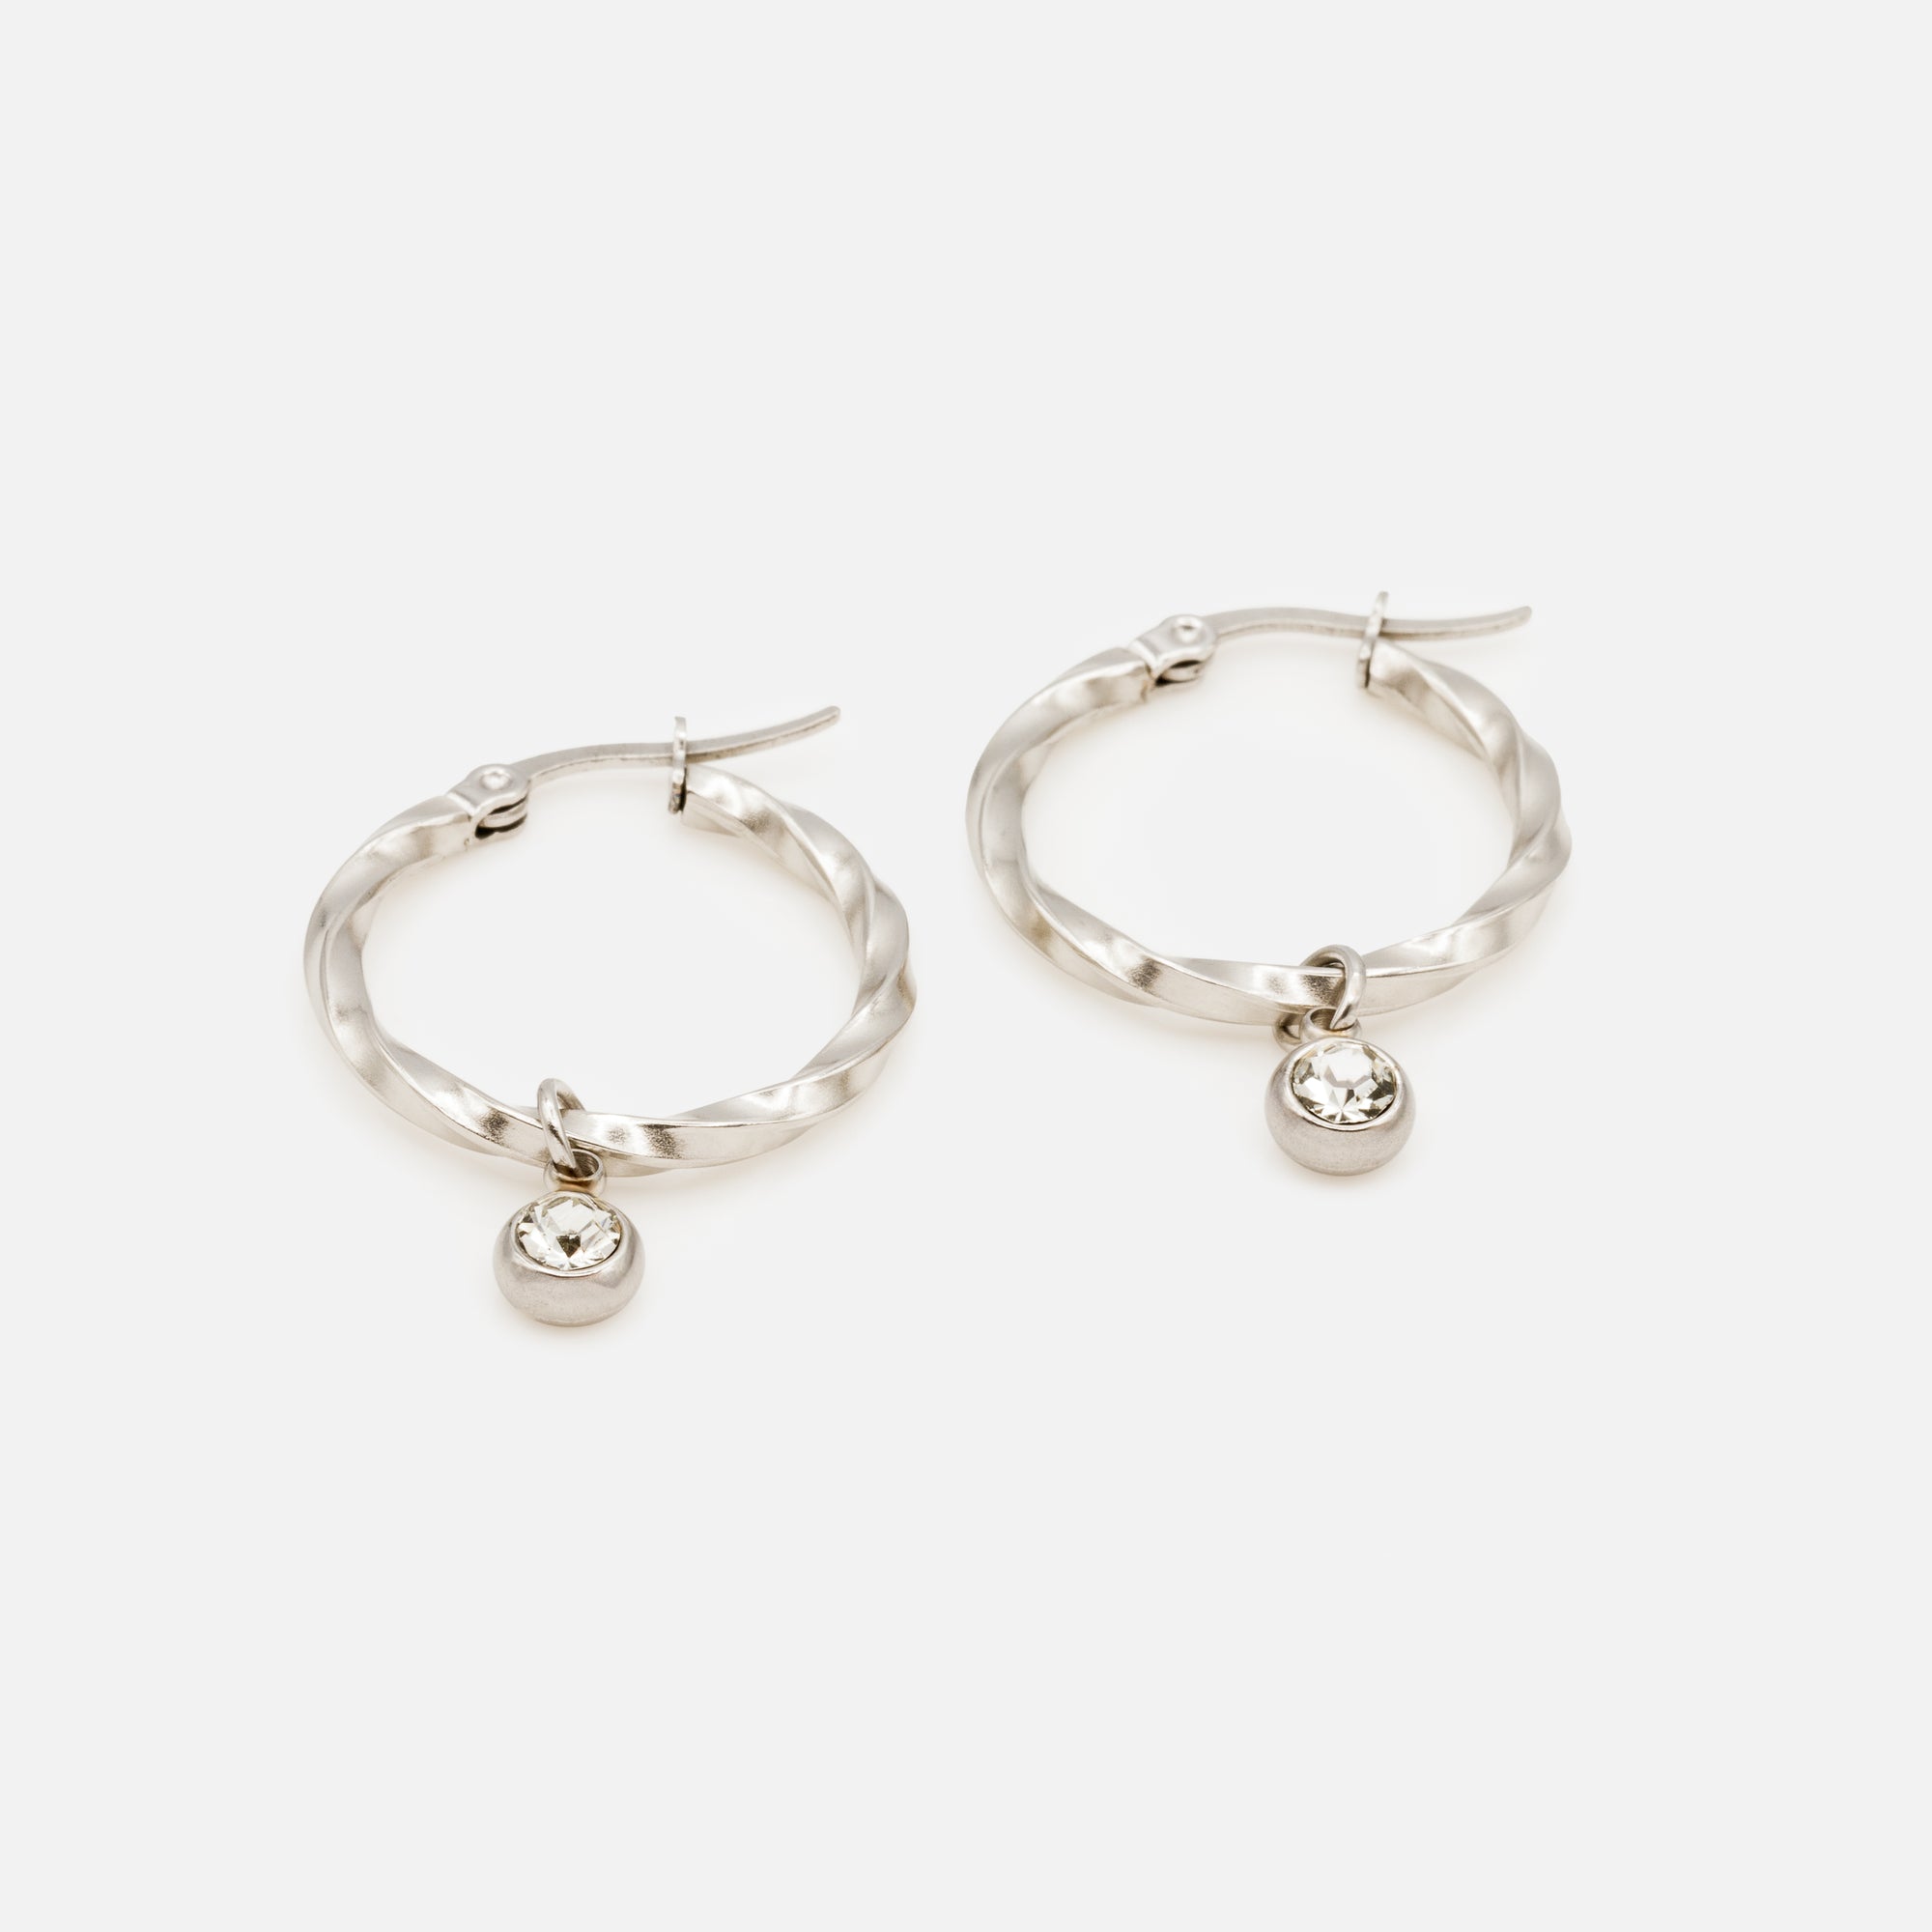 Twisted silver hoop earrings with removable cubic zirconia charm in stainless steel